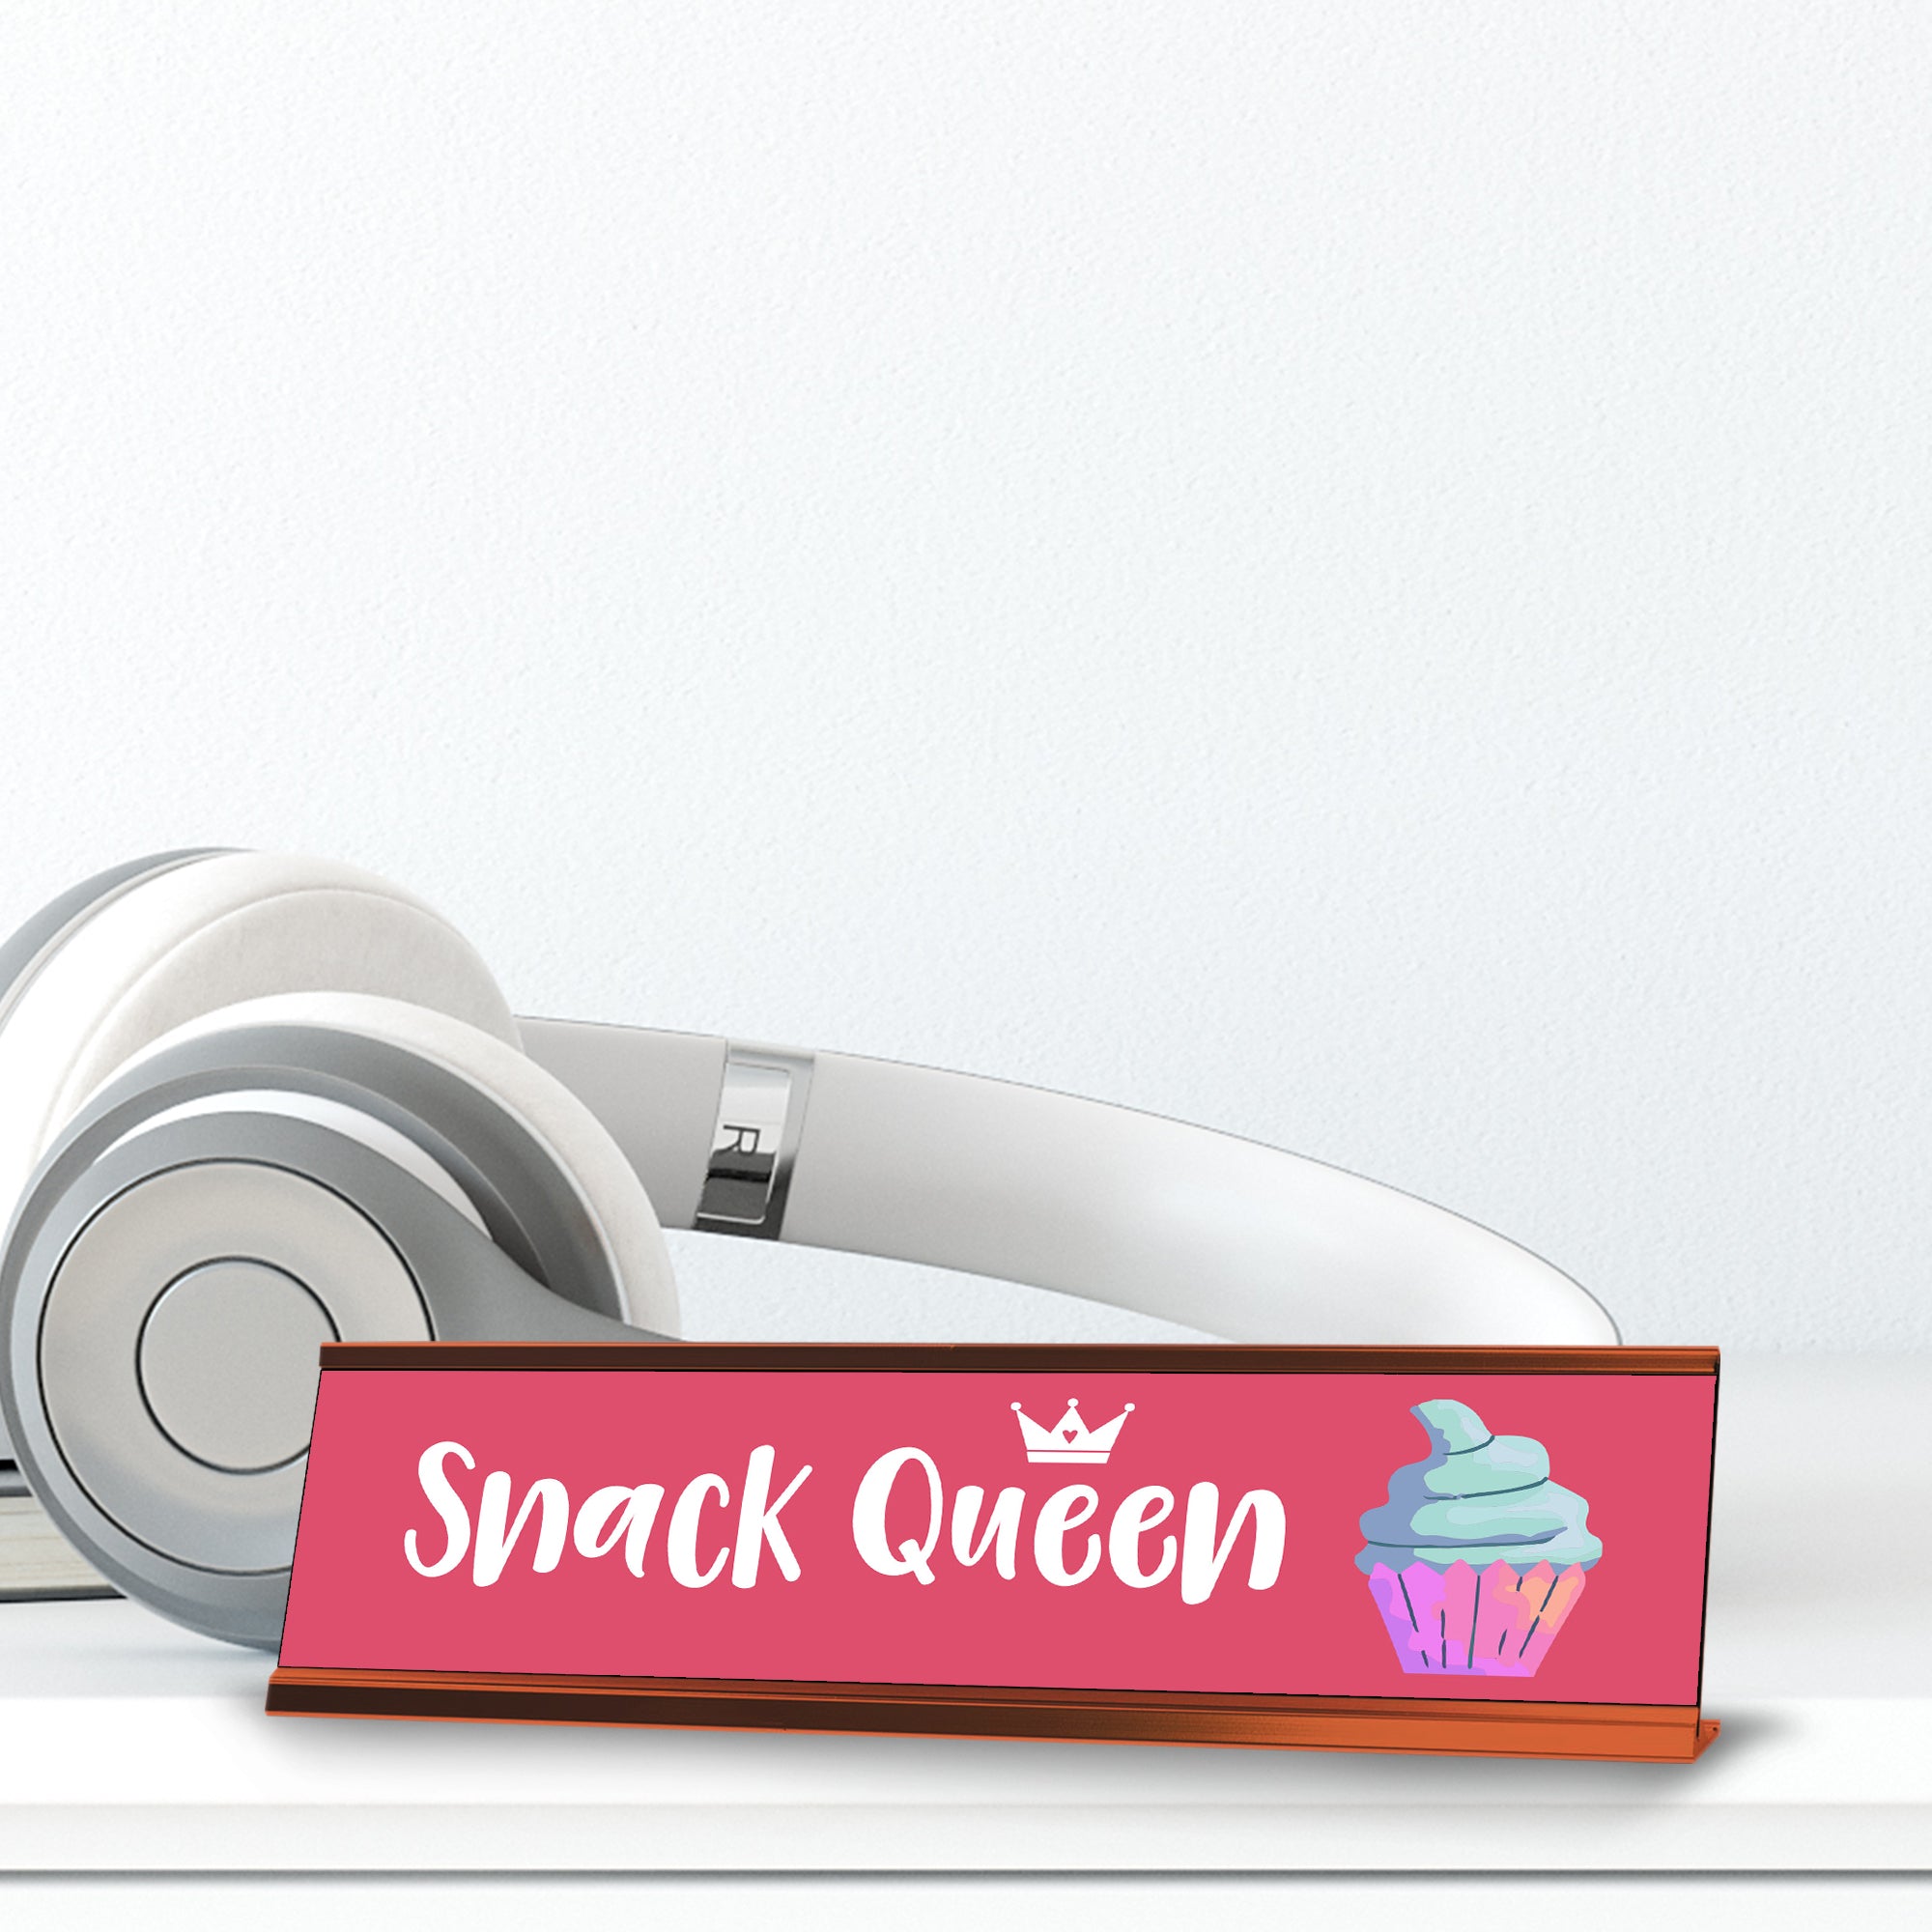 Snack queen, Muffin, Pink Novelty Desk Sign (2 x 8")